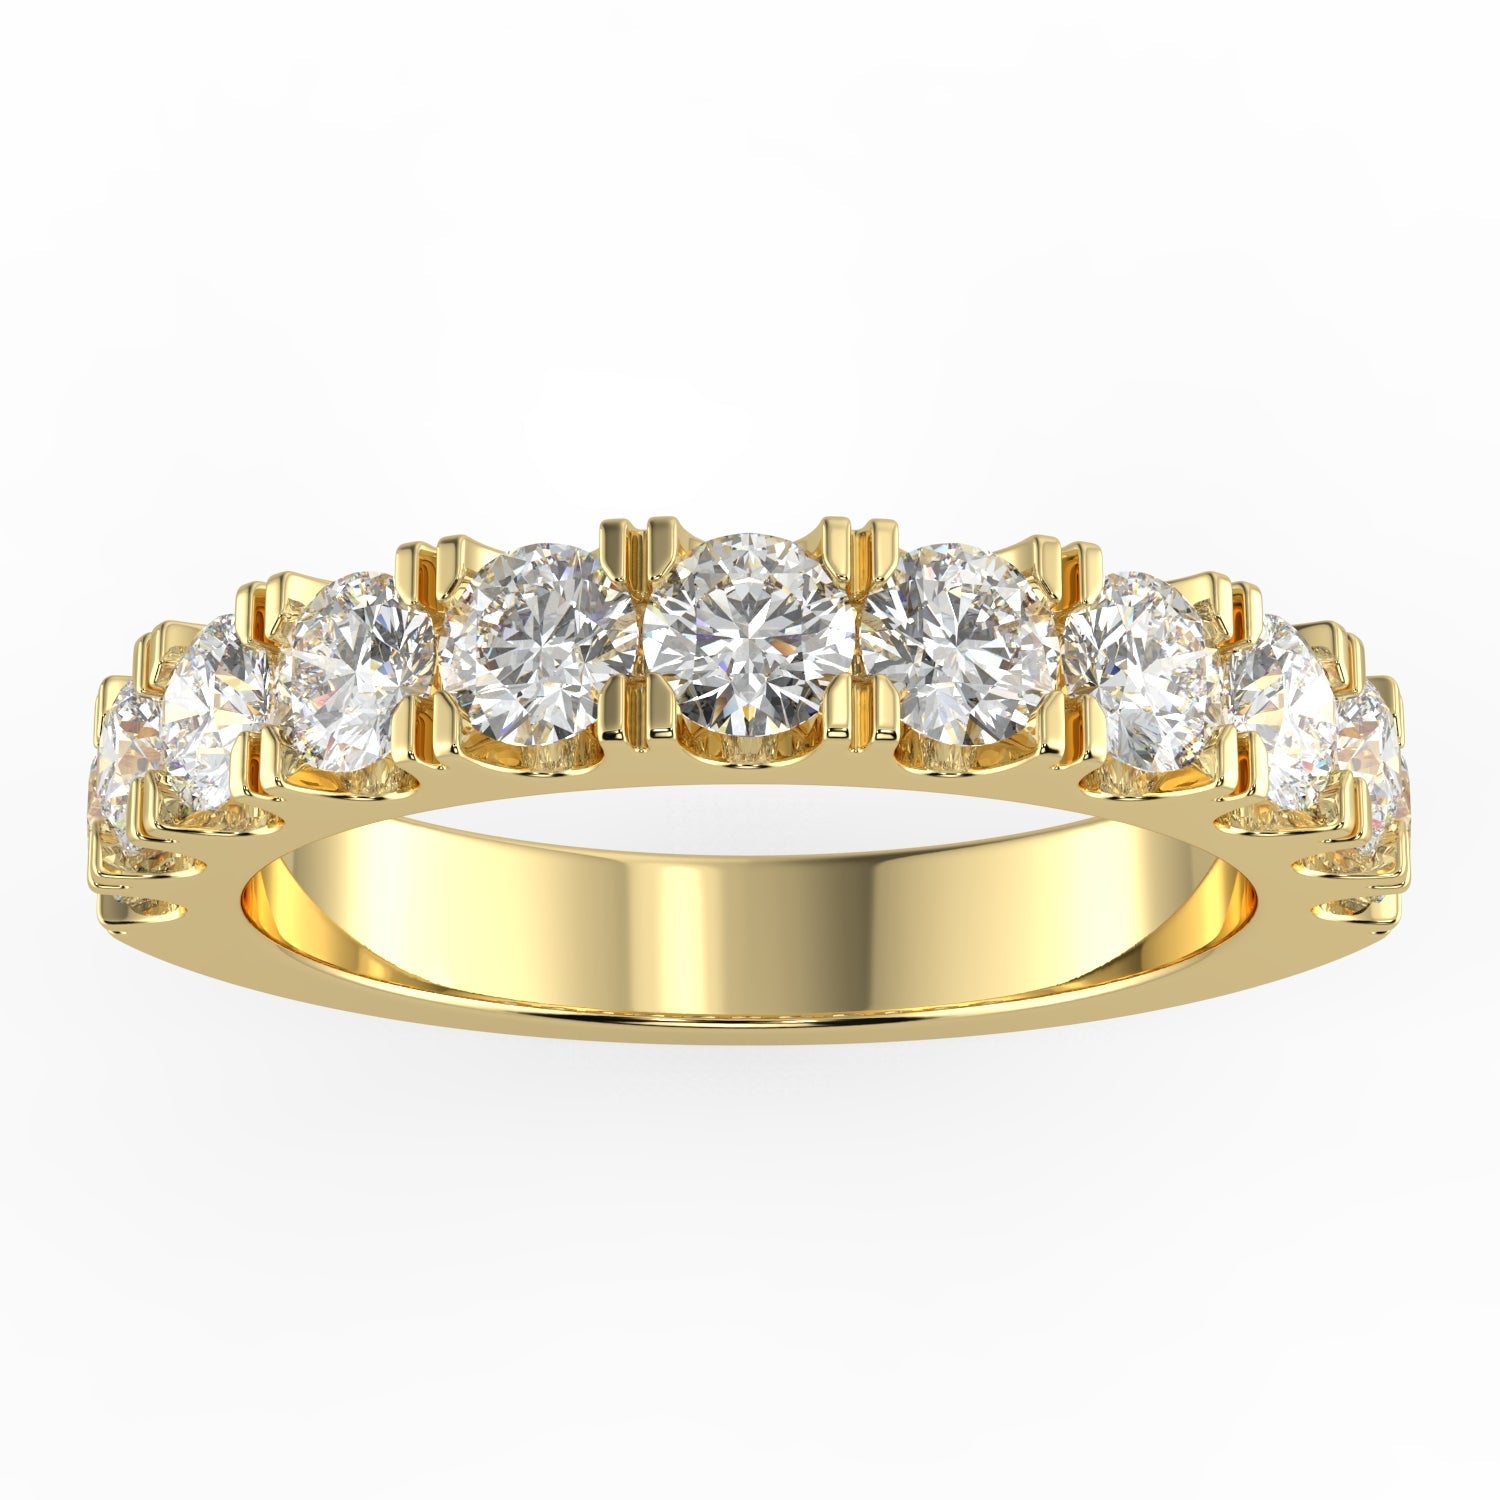 0.75CTW 11 ROUND STONE PRONG SET NATURAL DIAMOND GH/SI HALF ETERNITY WEDDING /ANNIVERSARY BAND SET IN 14K GOLD